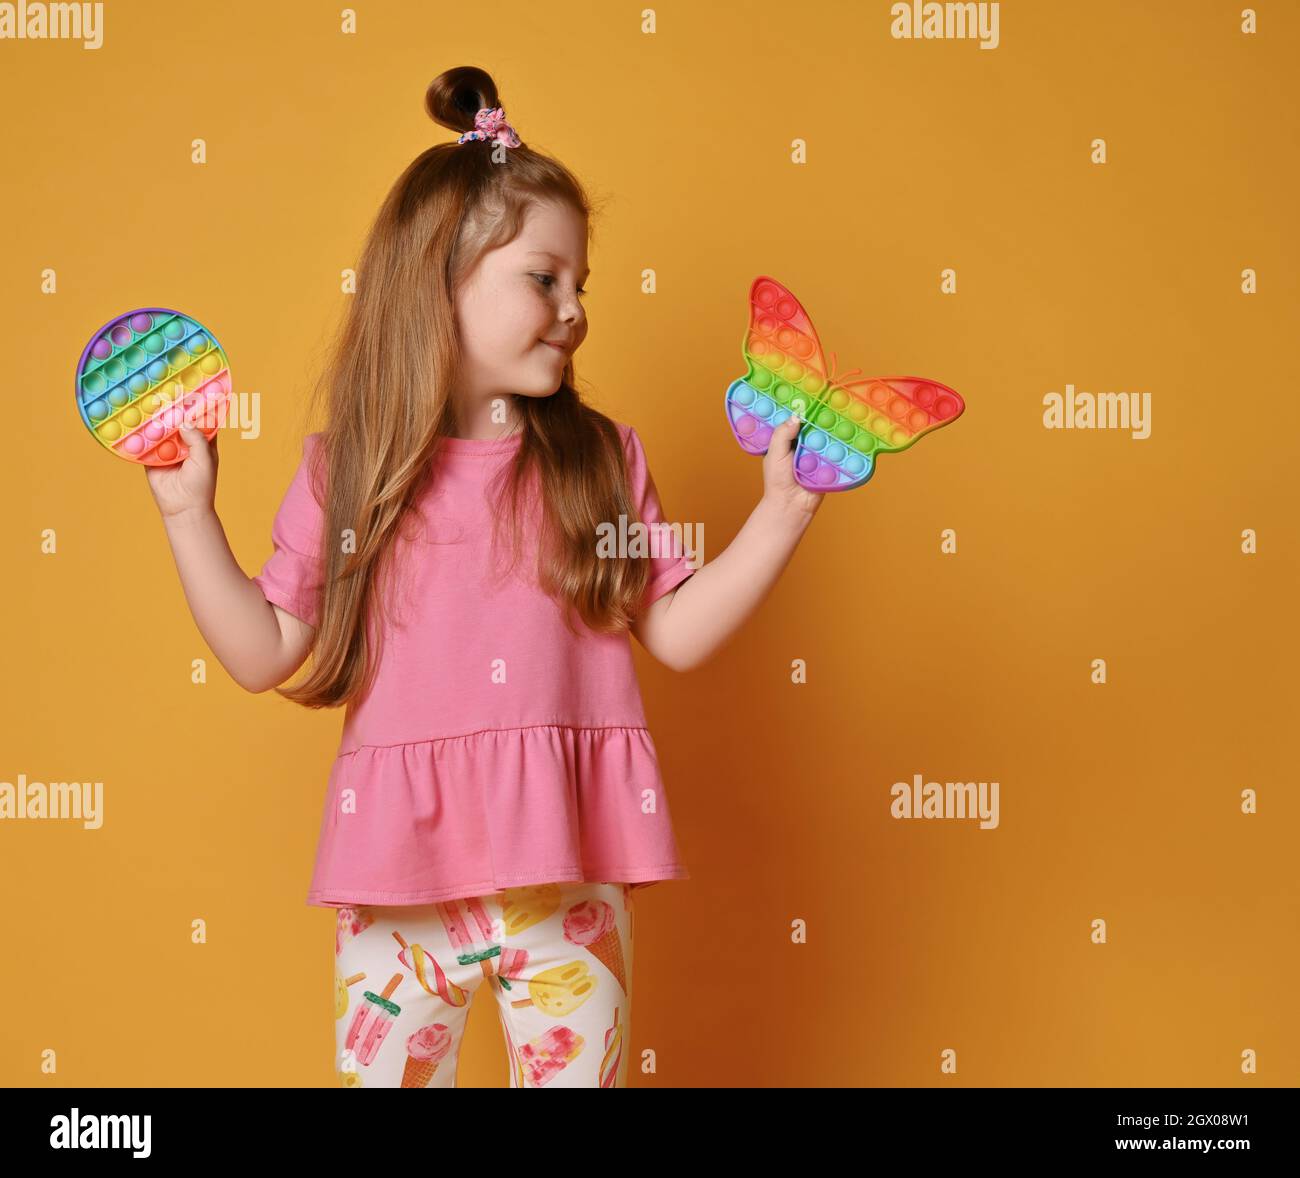 Kid girl in pink clothes shows two sensory rainbow color toys - pop it. Holds round and looks at butterfly shape one Stock Photo